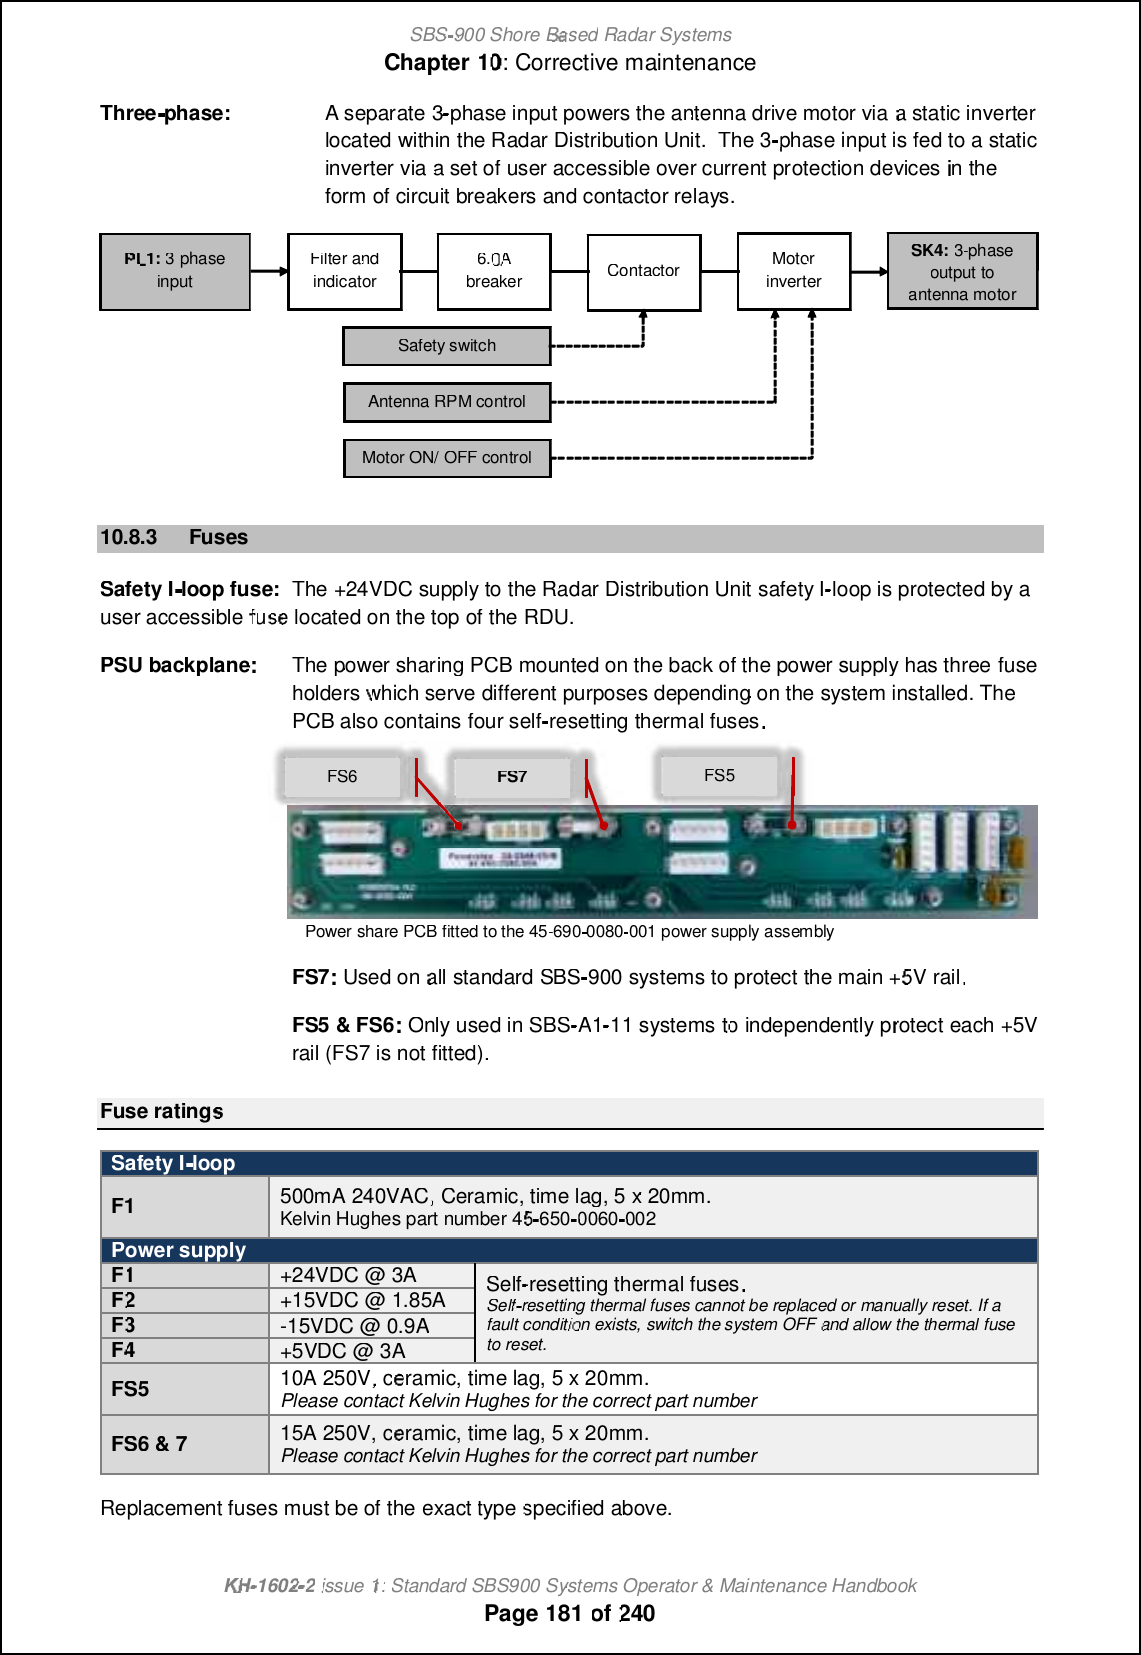 SBS-900 ShoreBaBasedRadar SystemsChapter1010:Corrective maintenanceKHKH-1602 2issue 1:Standard SBS900 Systems Operator &amp; Maintenance HandbookPage181of240Three-phase:A separate3-phase inputpowers the antenna drive motor viaastatic inverterlocatedwithin the Radar Distribution Unit.The 3phase input isfed toa staticinvertervia a set of user accessibleover current protection devicesin theform of circuitbreakers and contactor relays.10.8.3FusesSafety I-loop fuse:The+24VDC supply to the Radar Distribution Unitsafety I-loop is protected by auser accessiblefufuseselocated on the top of the RDU.PSU backplaneThe power sharing PCB mounted on the back of the power supply has threefuseholderswhich serve different purposes depending on the system installed. ThePCB also contains four self-resetting thermal fuses.Power share PCB fitted to the 45-690-0080-001 power supply assemblyFS7Used onallstandardSBS-900 systems to protect the main +5V rail.FS5 &amp; FS6Only used in SBS-A1A1-11 systemstotoindependently protect each +5Vrail(FS7 is not fitted).Fuse ratingsSafety I-loopF1500mA 240VAC,Ceramic, time lag, 5 x 20mm.Kelvin Hughes part number45456500060002Power supplyF1F1+24VDC @ 3ASelf-resetting thermal fuses.Selfresetting thermal fuses cannot be replaced or manually reset. If afault condition exists, switch the system OFFand allow the thermal fuseto reset.F2F2+15VDC @ 1.85AF3F3-15VDC @ 0.9AF4F4+5VDC @ 3AFS510A 250V, ceramic, time lag, 5 x 20mm.Please contact Kelvin Hughes for the correct part numberFS6 &amp; 715A 250V, ceramic, time lag, 5 x 20mm.Please contact Kelvin Hughes for the correct part numberReplacement fuses must be of theexacttypespecified above.PLPL1:3-phaseinputFilter andindicator6.0AbreakererContactorMotorinverterSafety switchAntenna RPM controlMotor ON/ OFF controlSK4:3-phaseoutput toantenna motorFS6FS7FS5